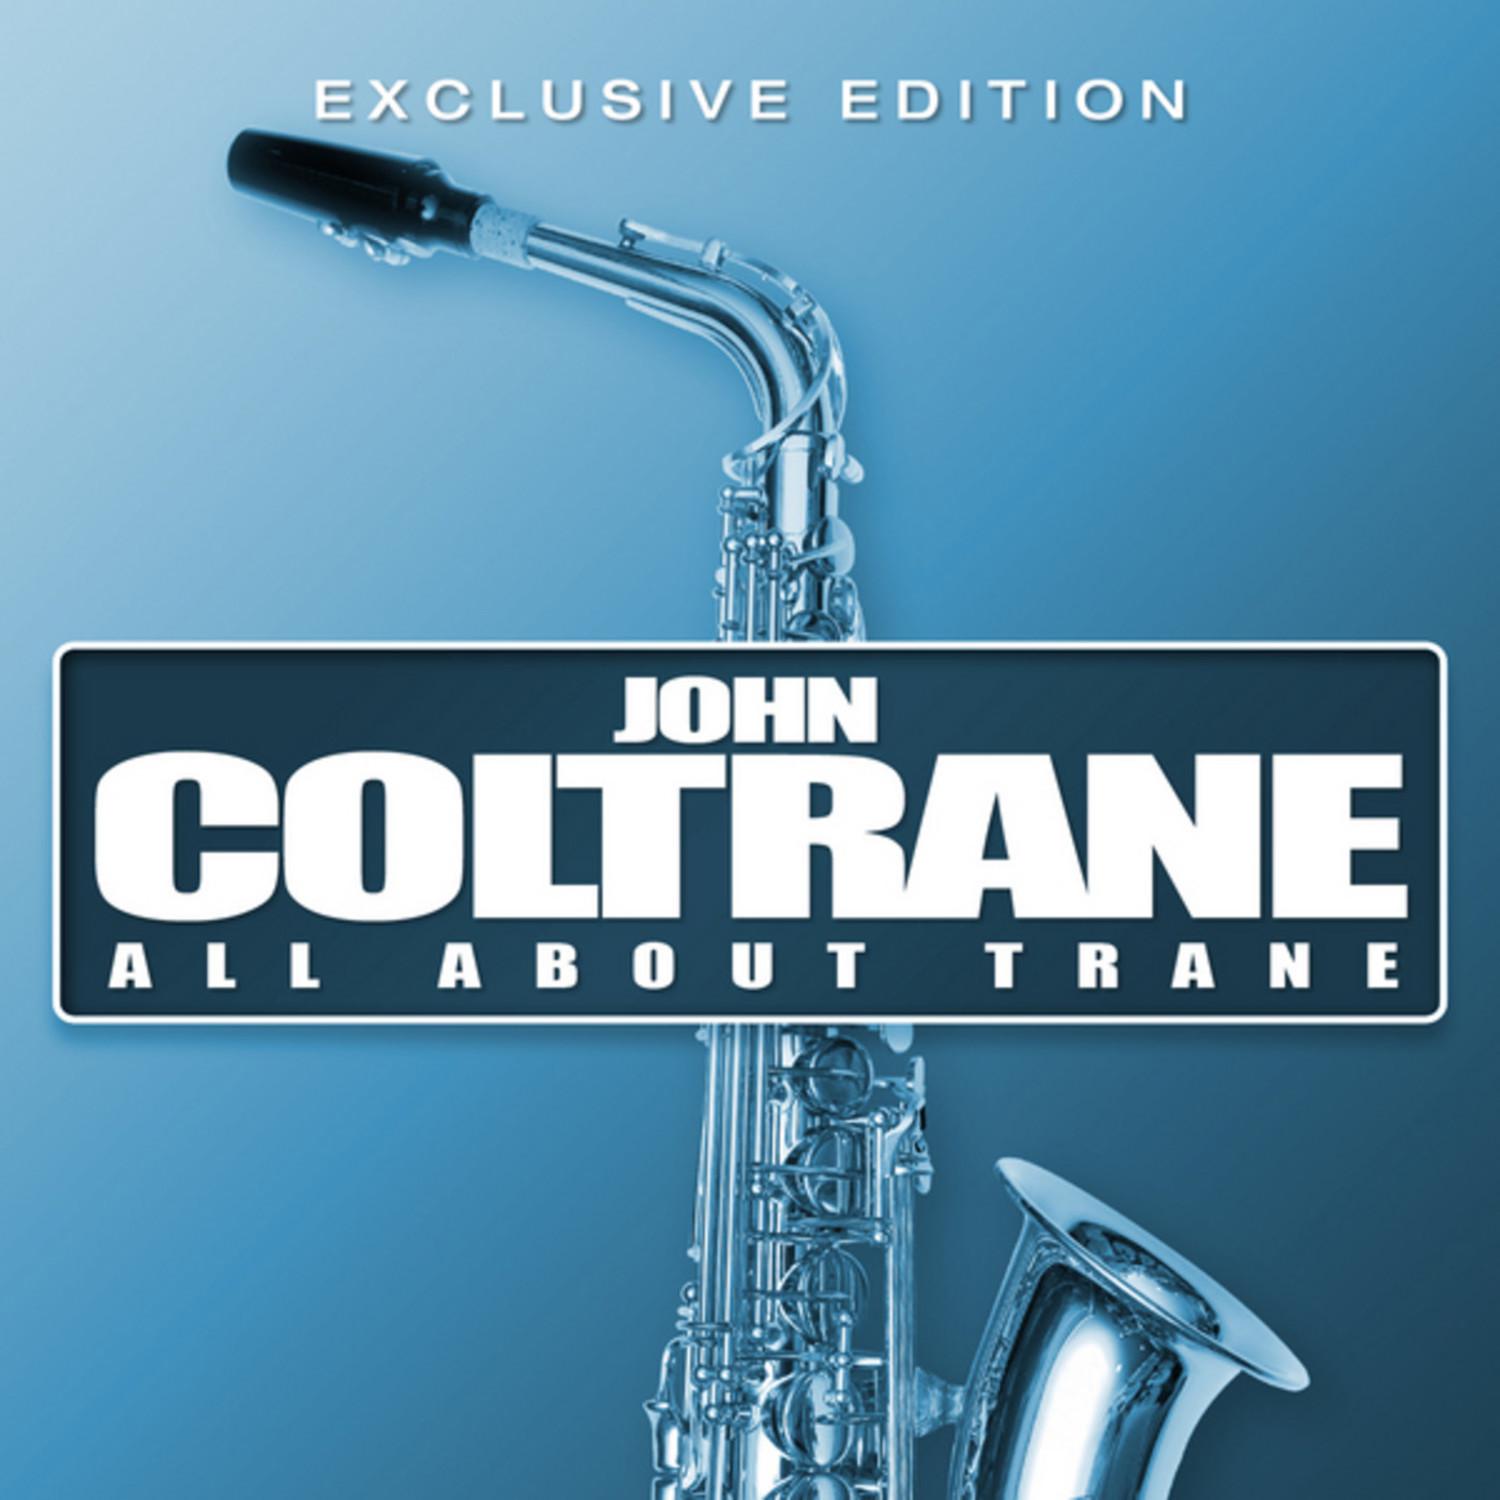 All about Trane